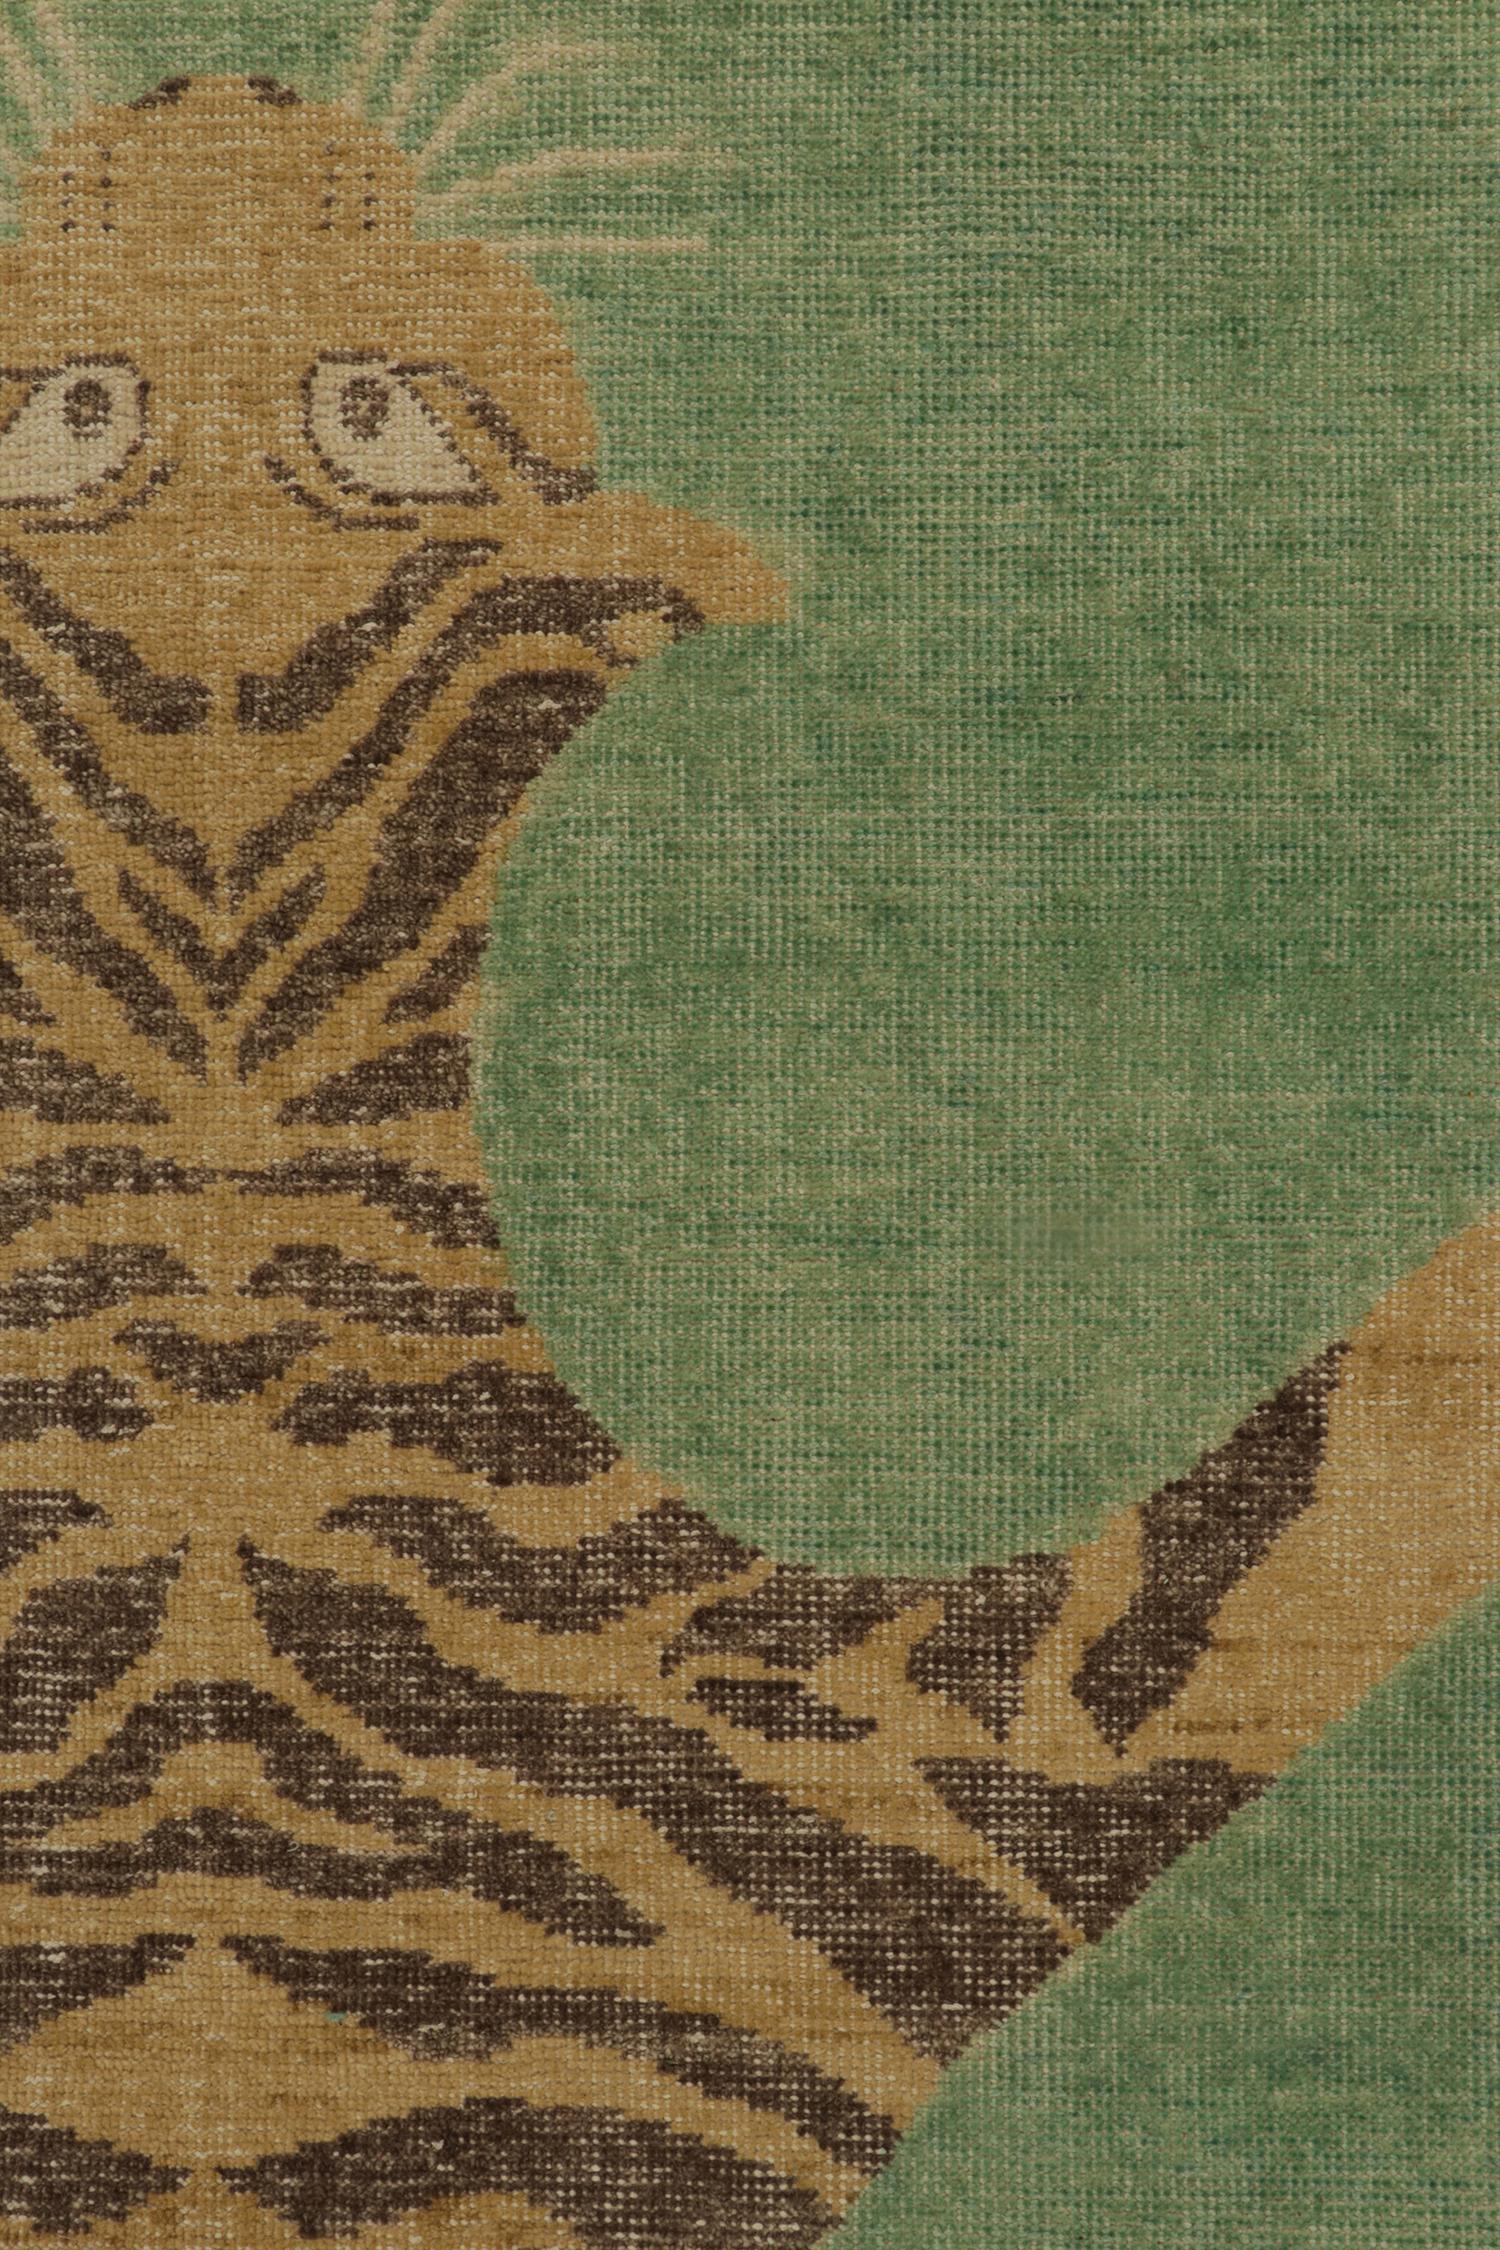 Hand-Knotted Rug & Kilim’s Distressed Tiger Skin Style Rug in Green, Beige & Black Pictorial  For Sale